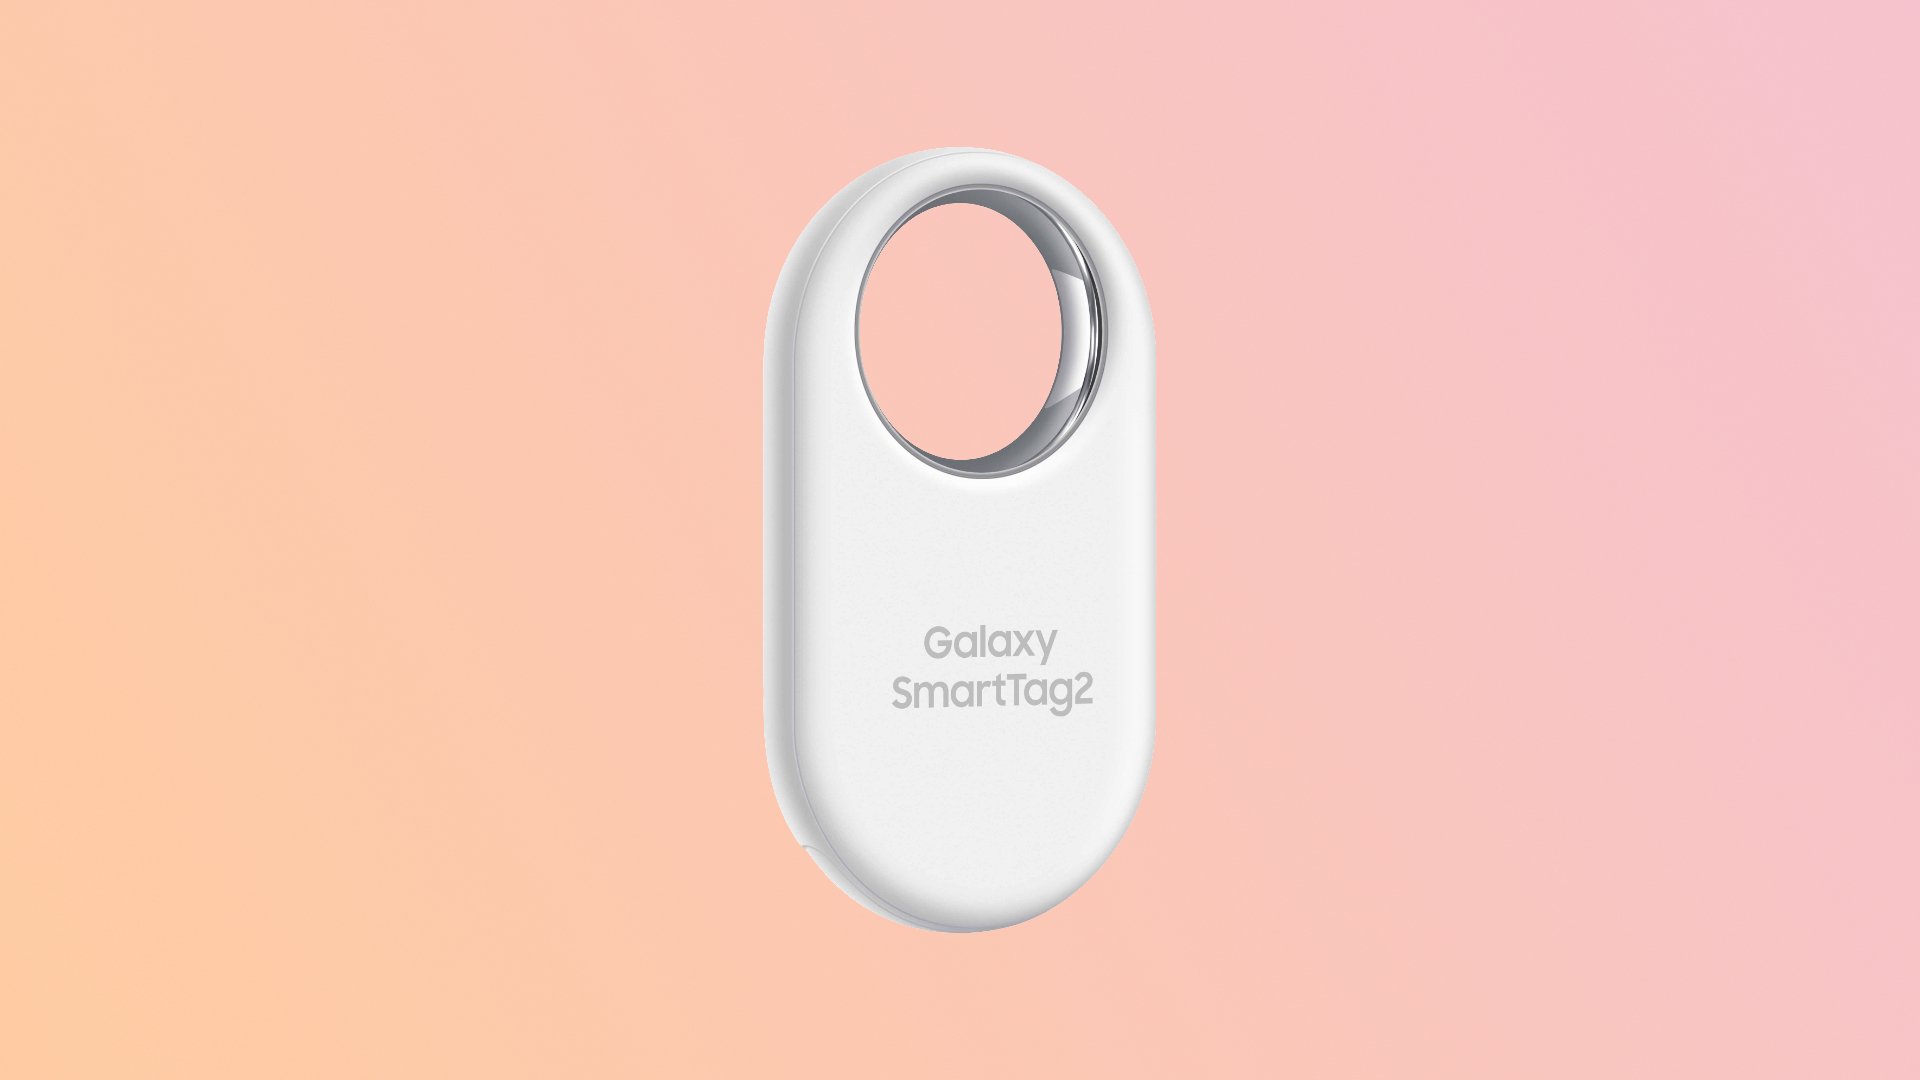 Samsung announces Galaxy SmartTag2 so you can track your valuables